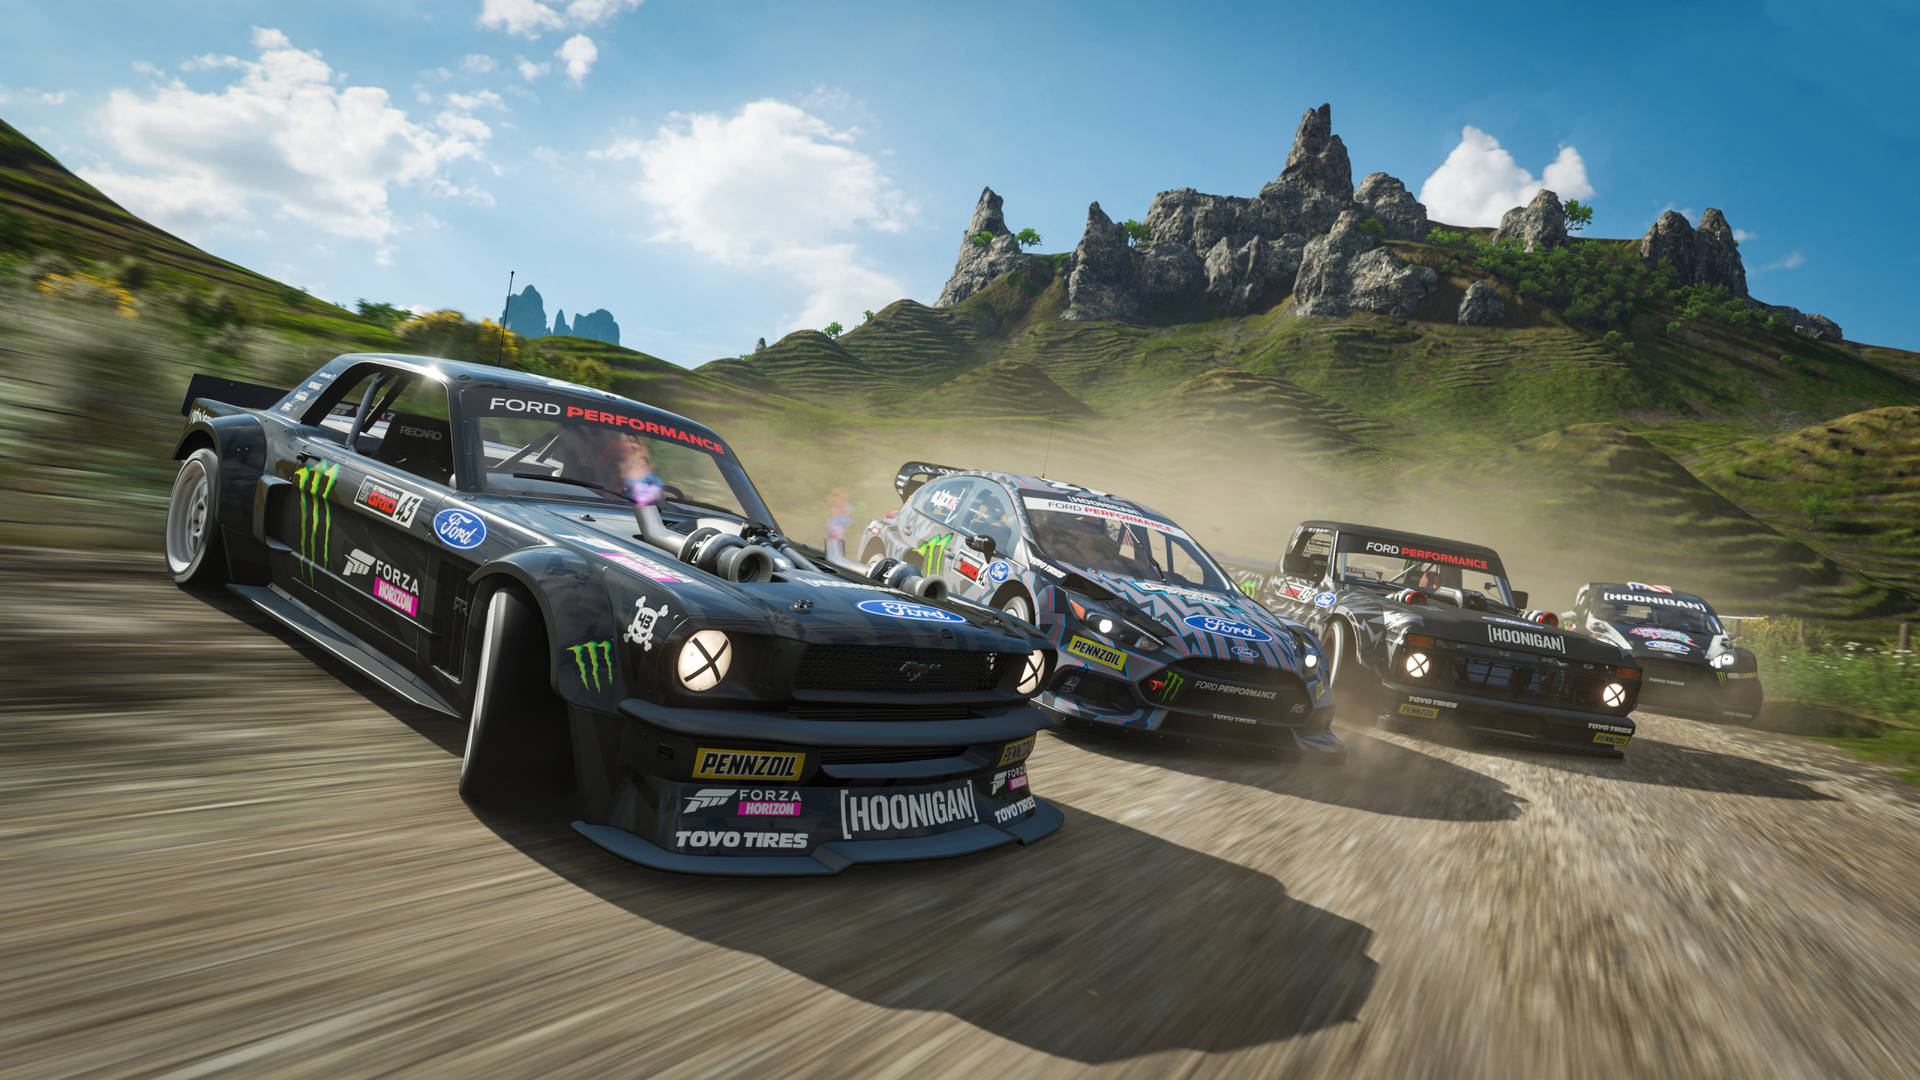 Get behind the wheel and race with Forza Gaming Wallpaper